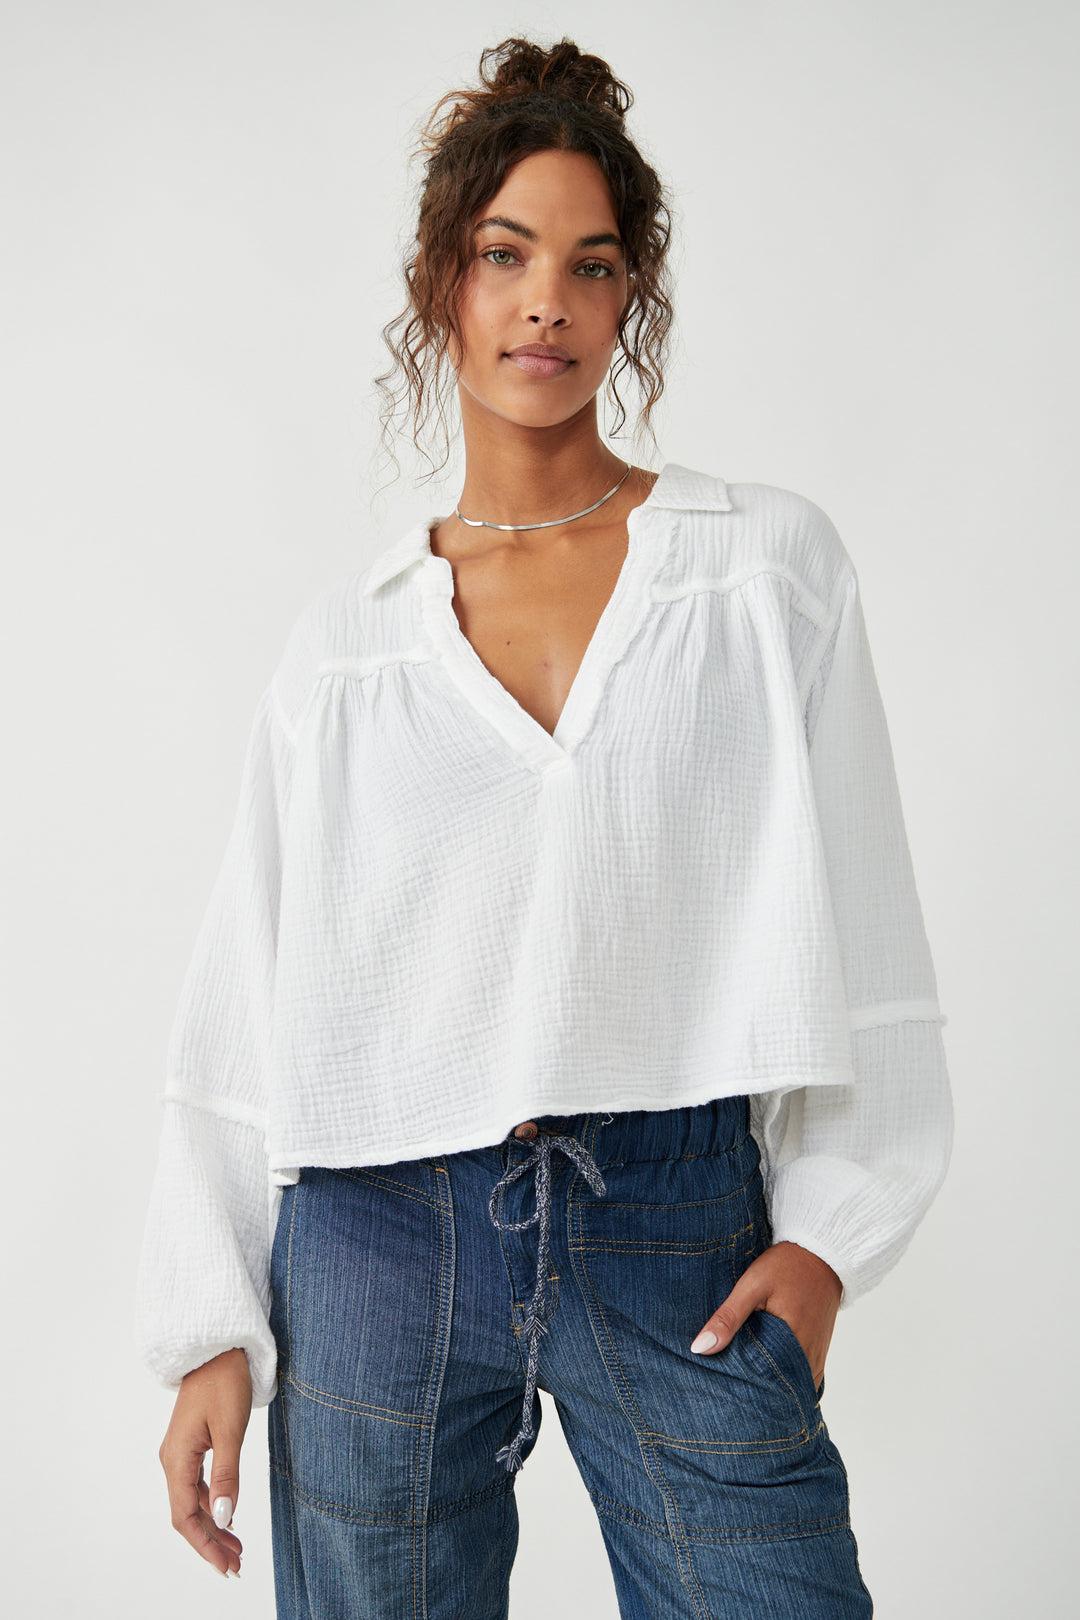 Free People Yucca Doppeltuch